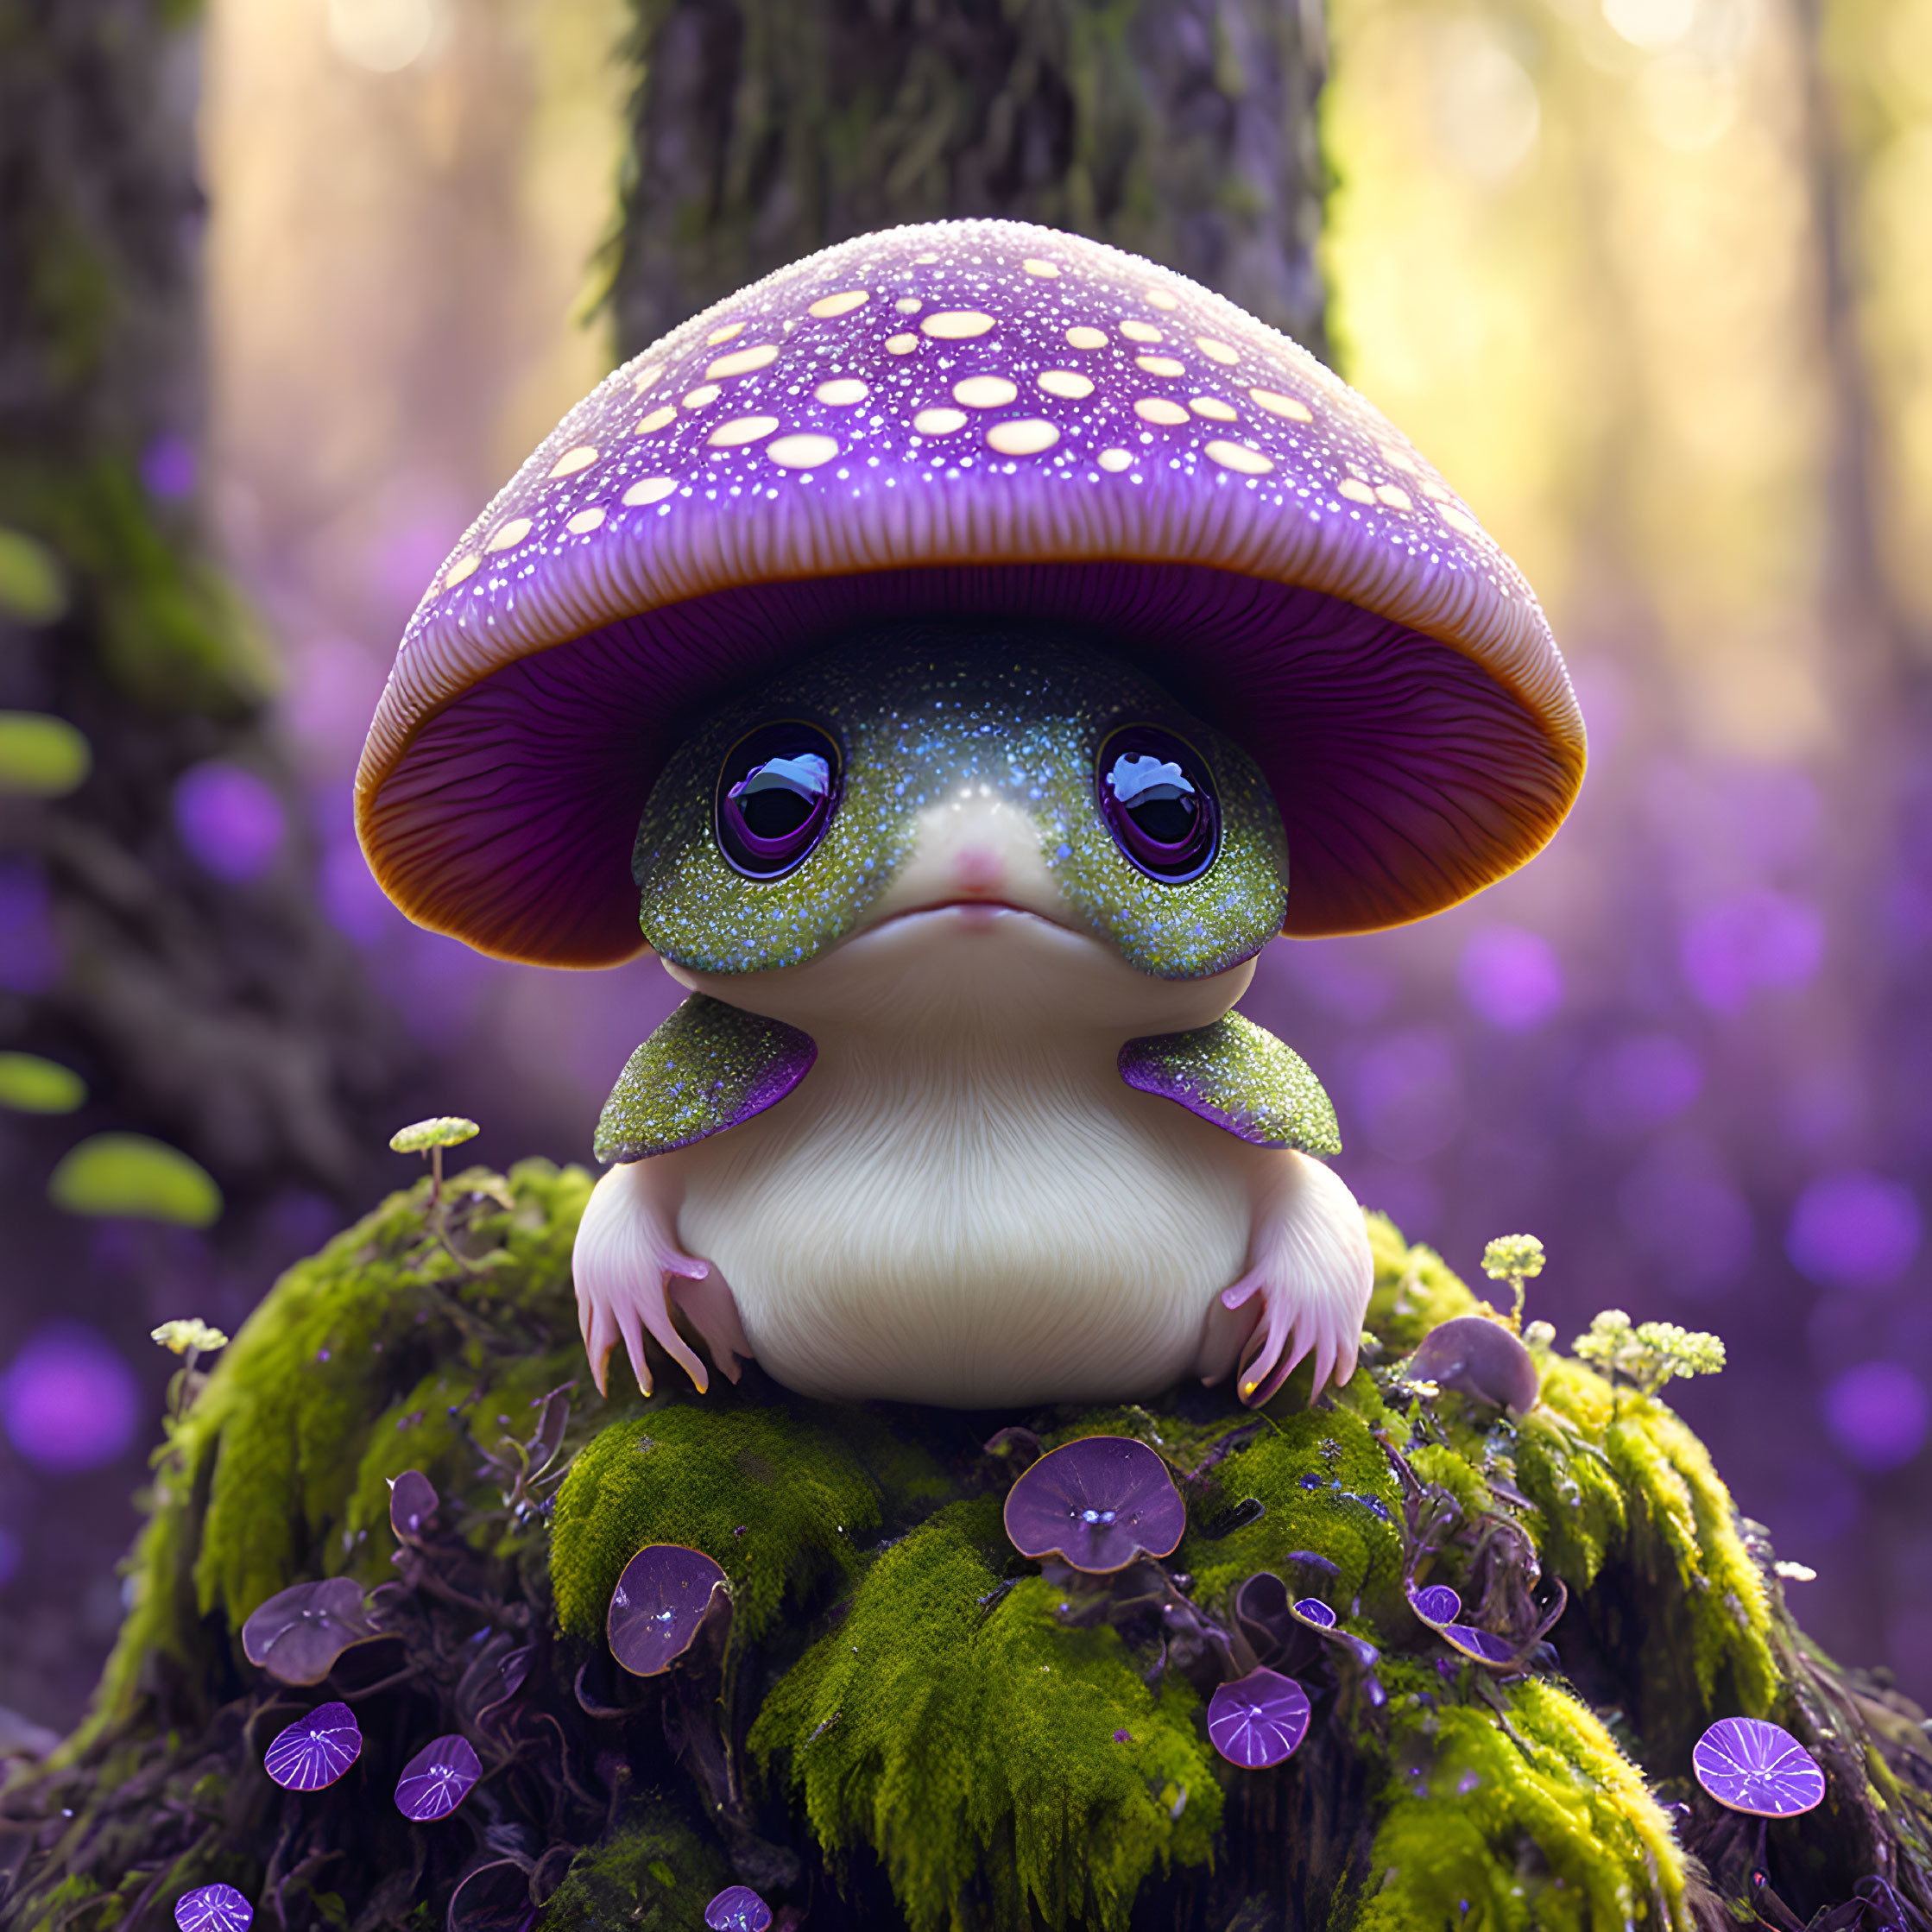 Illustration of cute creature with large eyes in purple forest